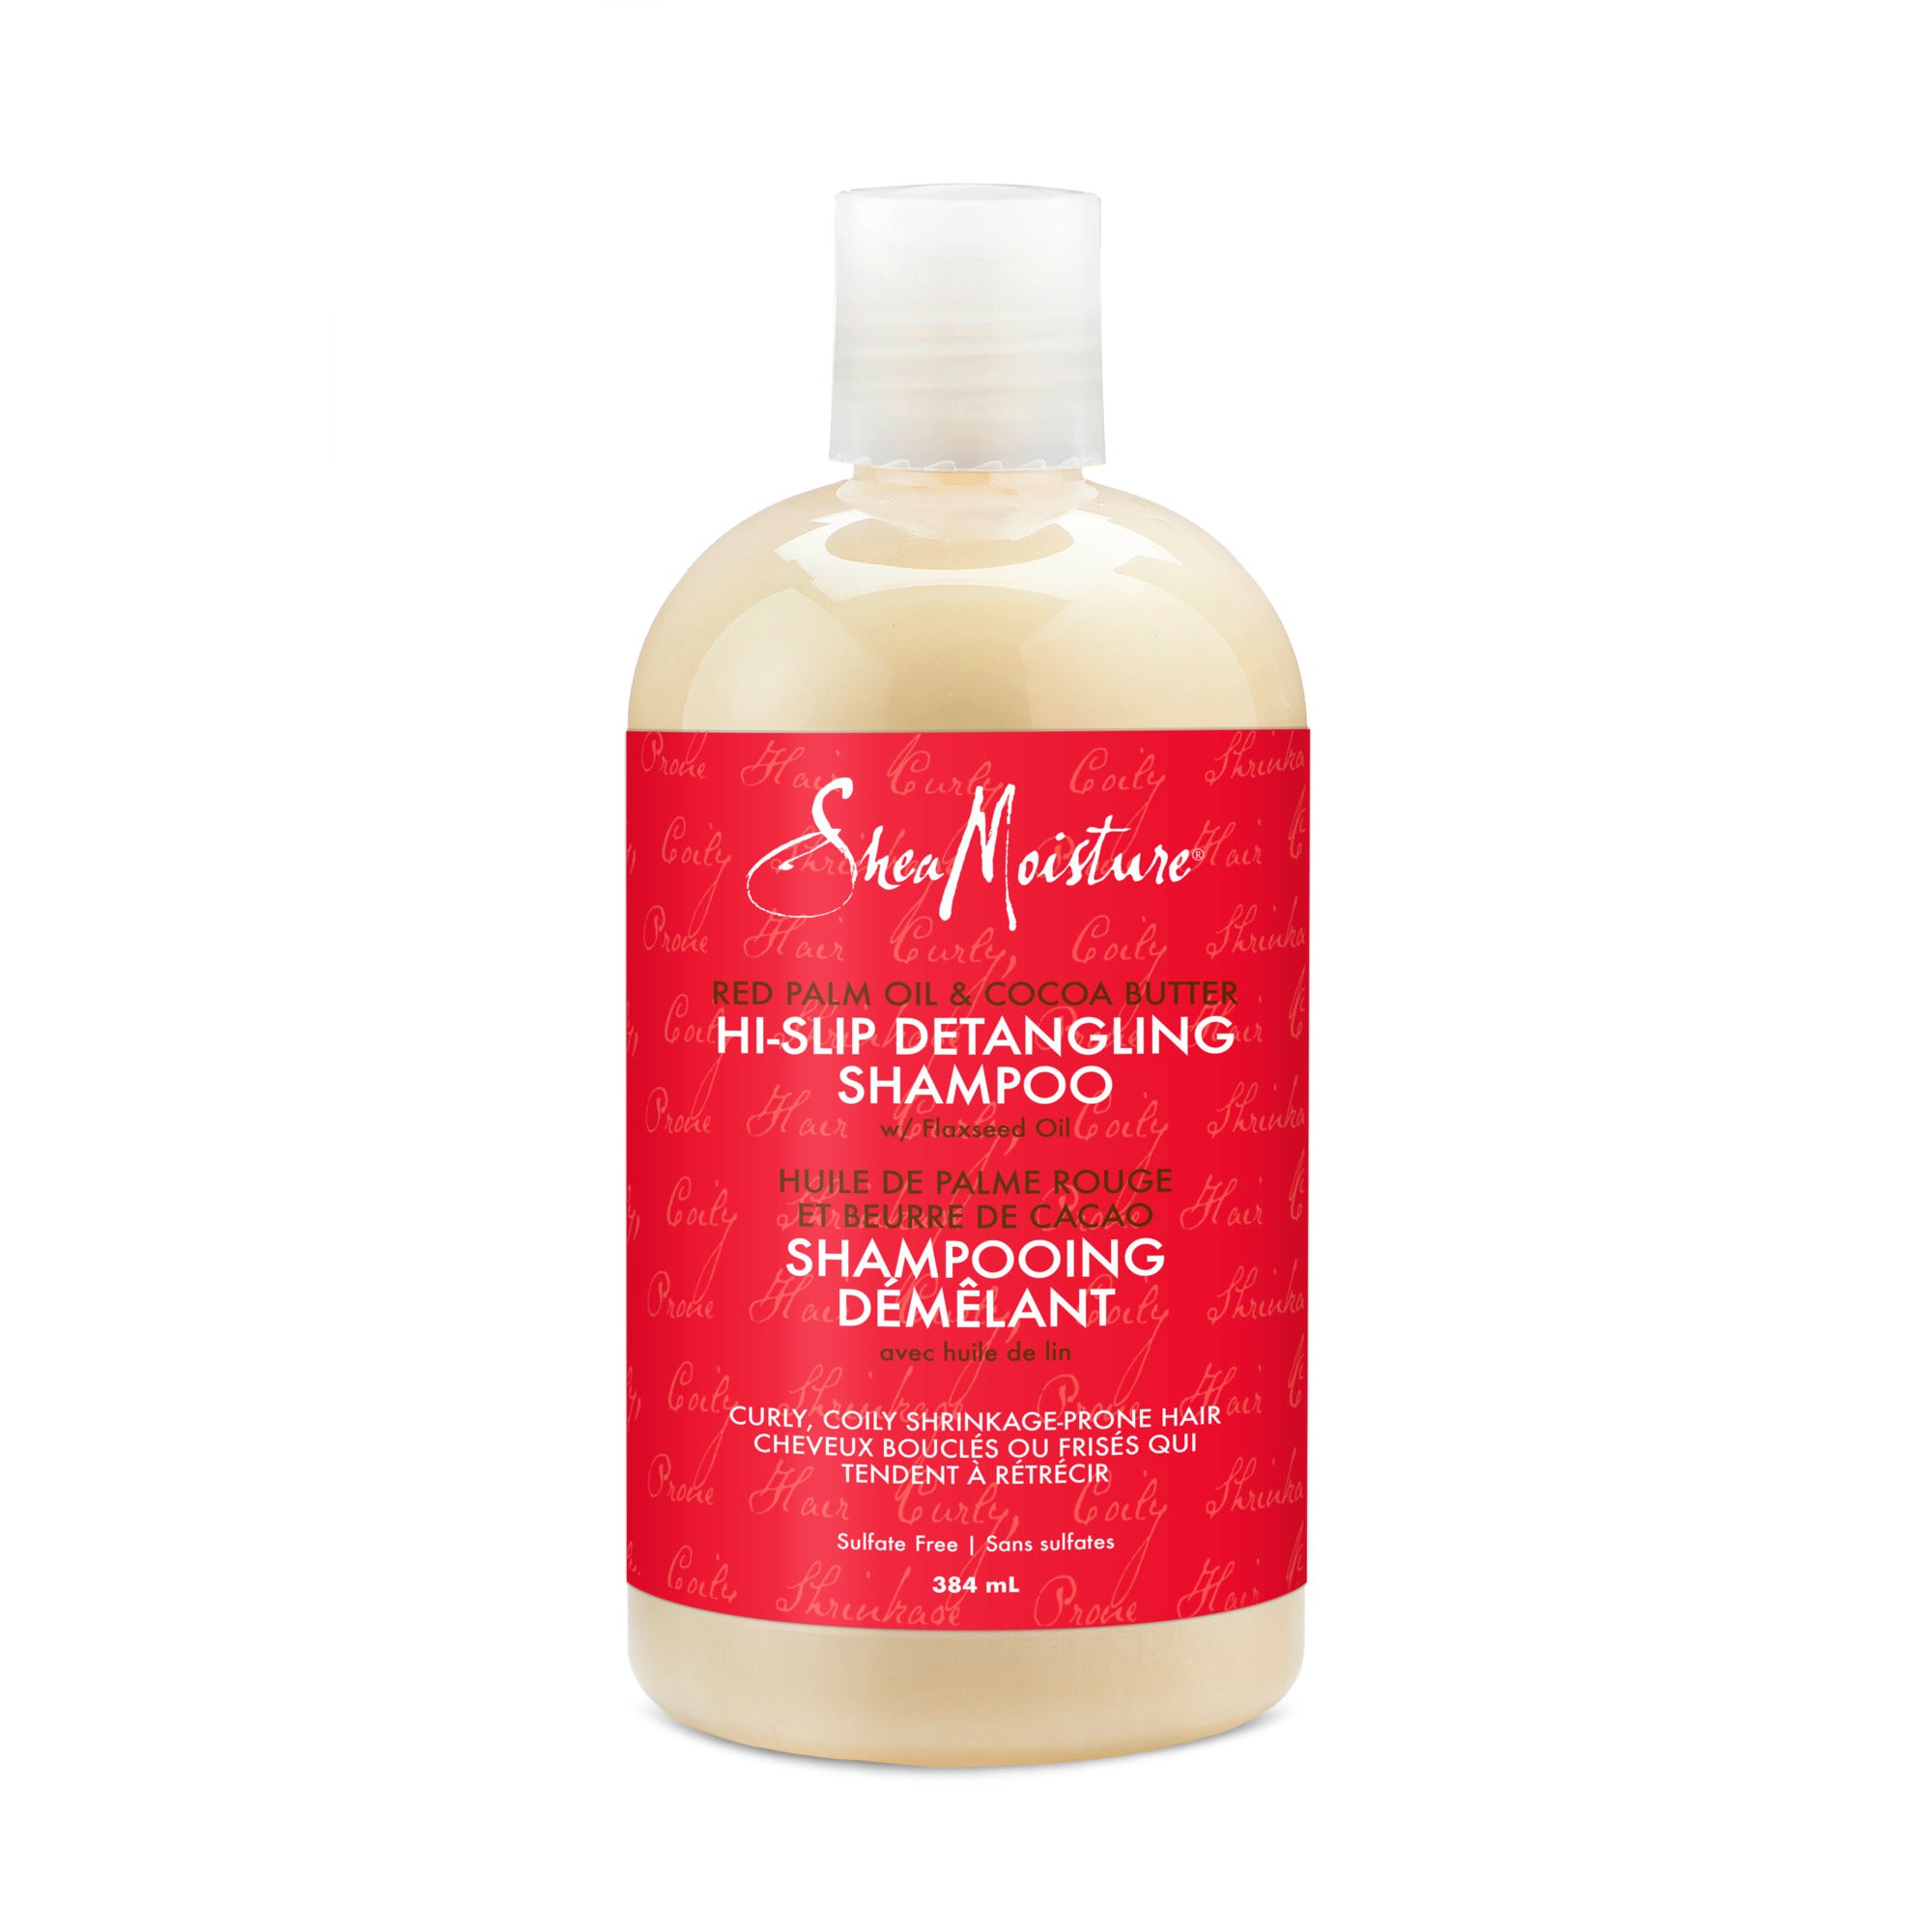 Showing the front angle view of the SheaMoisture Red Palm Oil & Cocoa Butter Detangling Shampoo 384mL product.